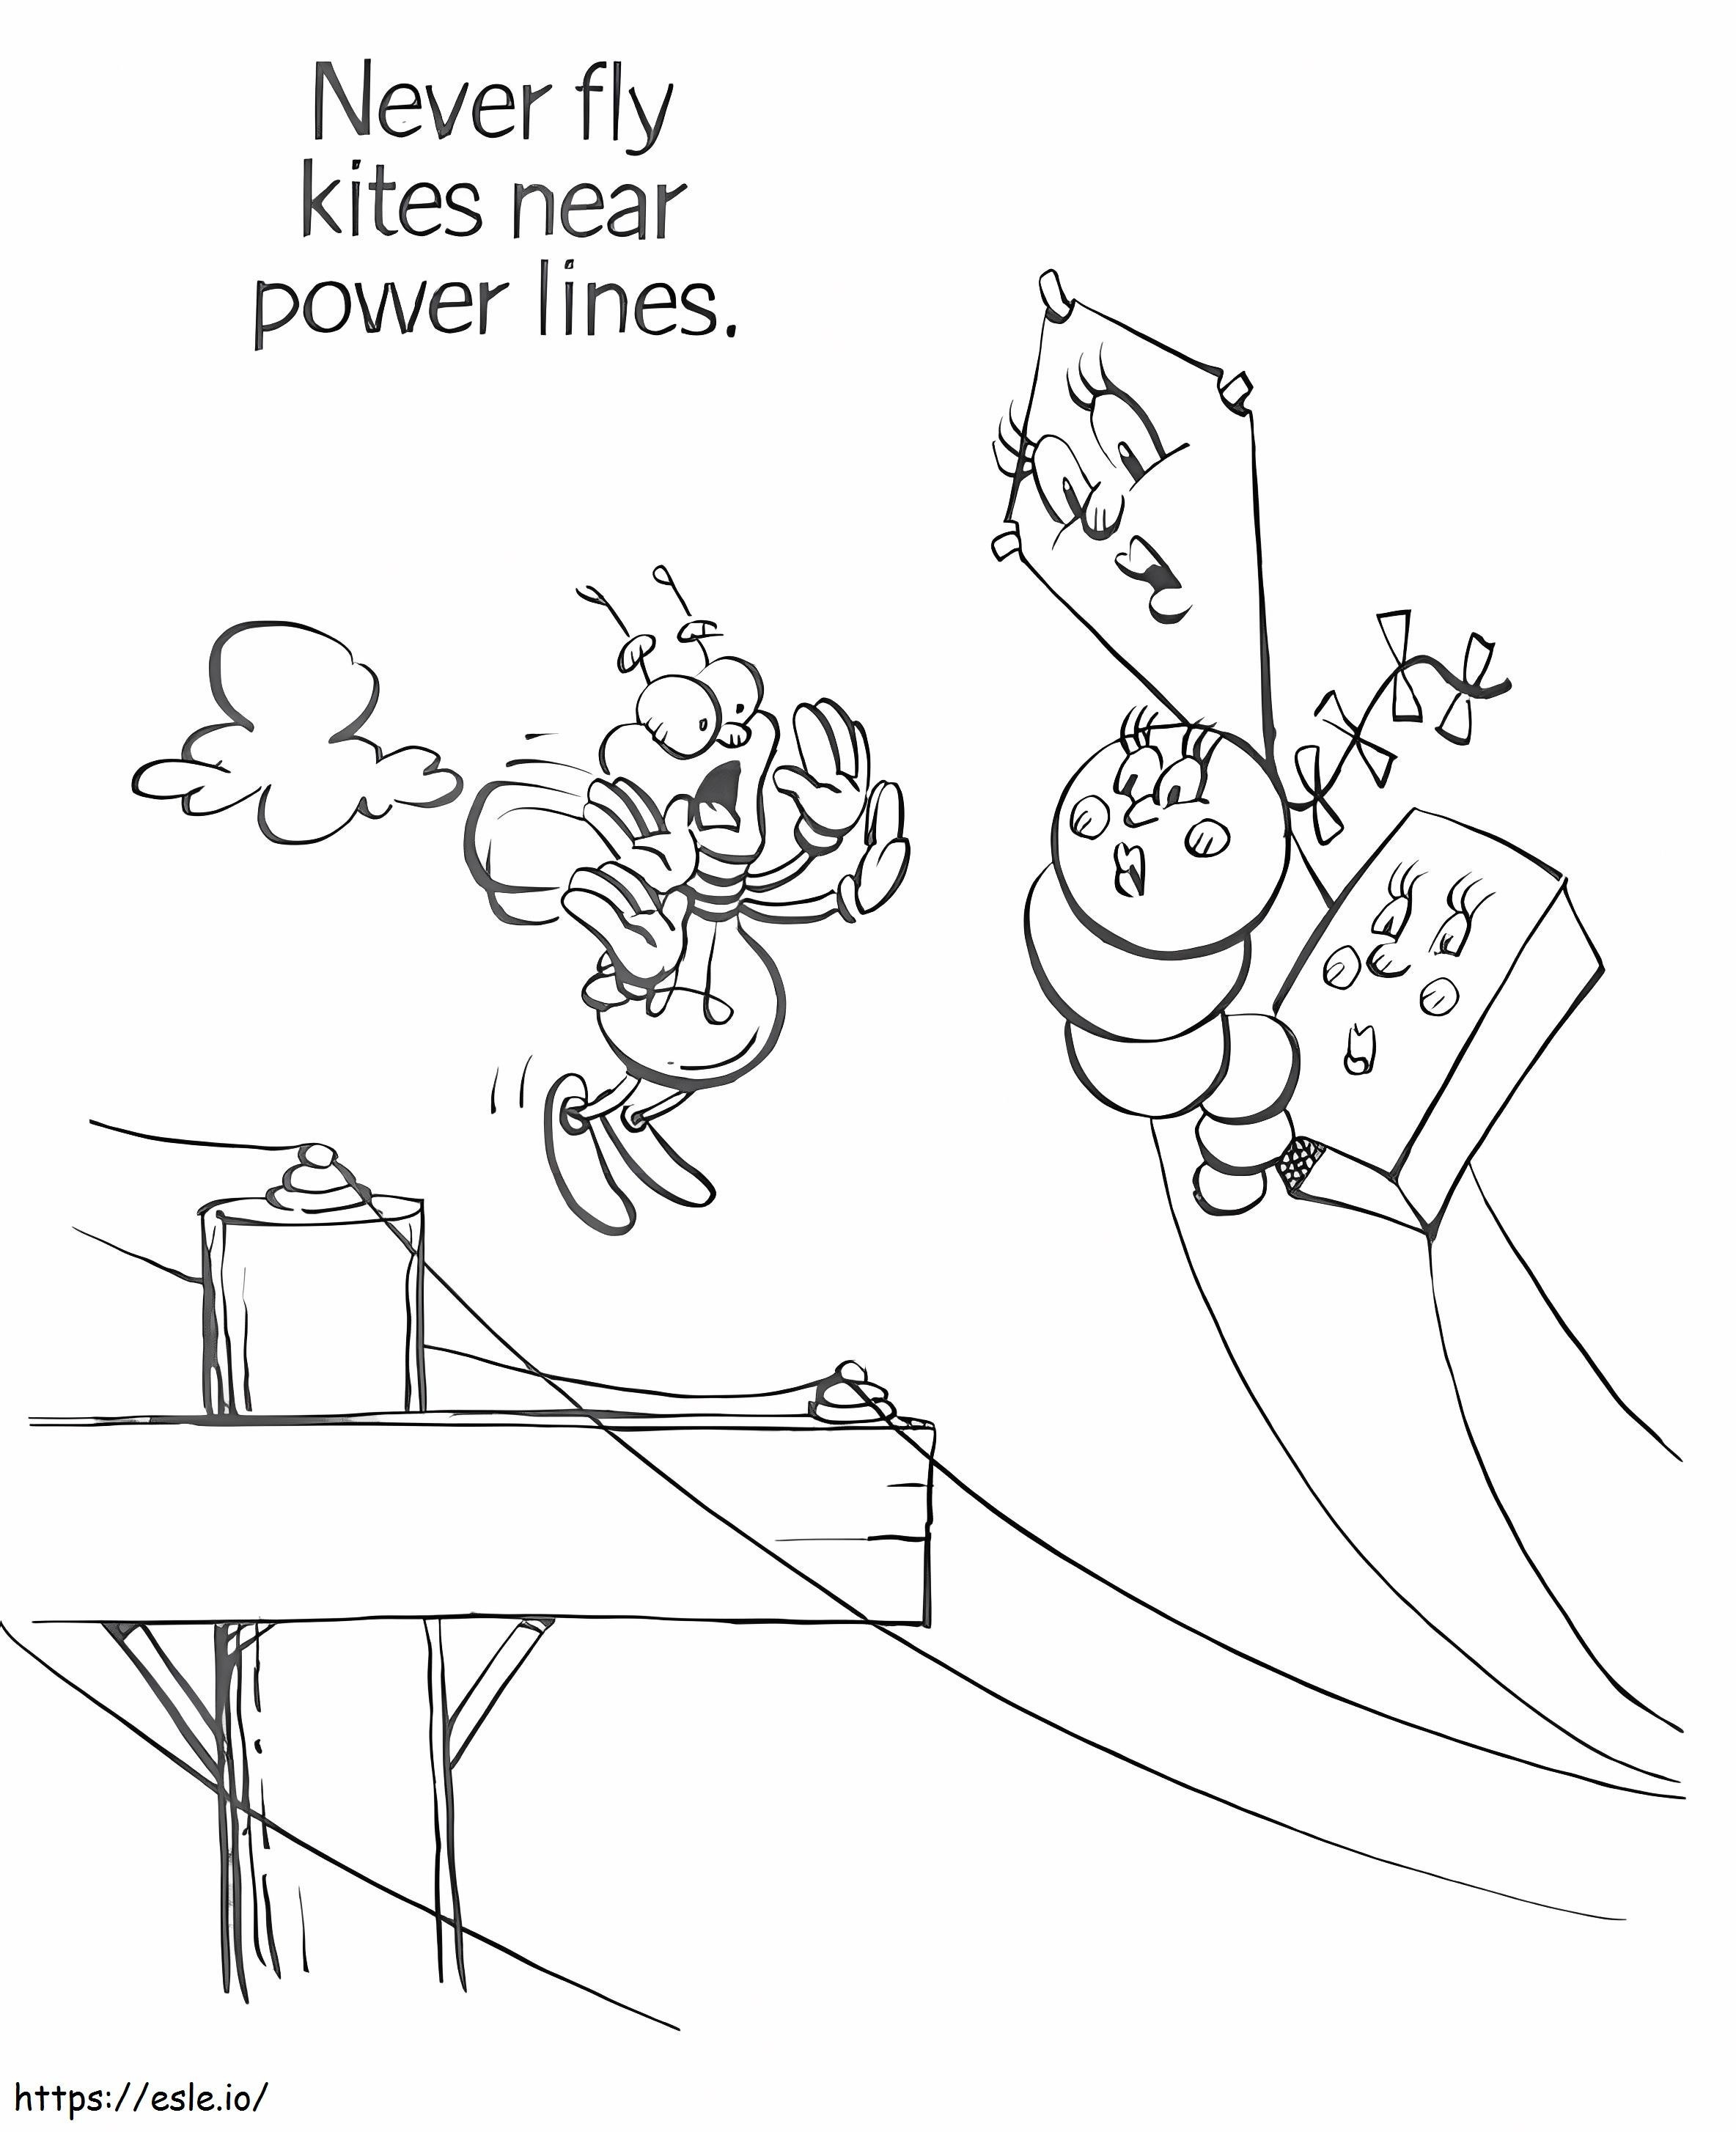 Electrical Safety 3 coloring page